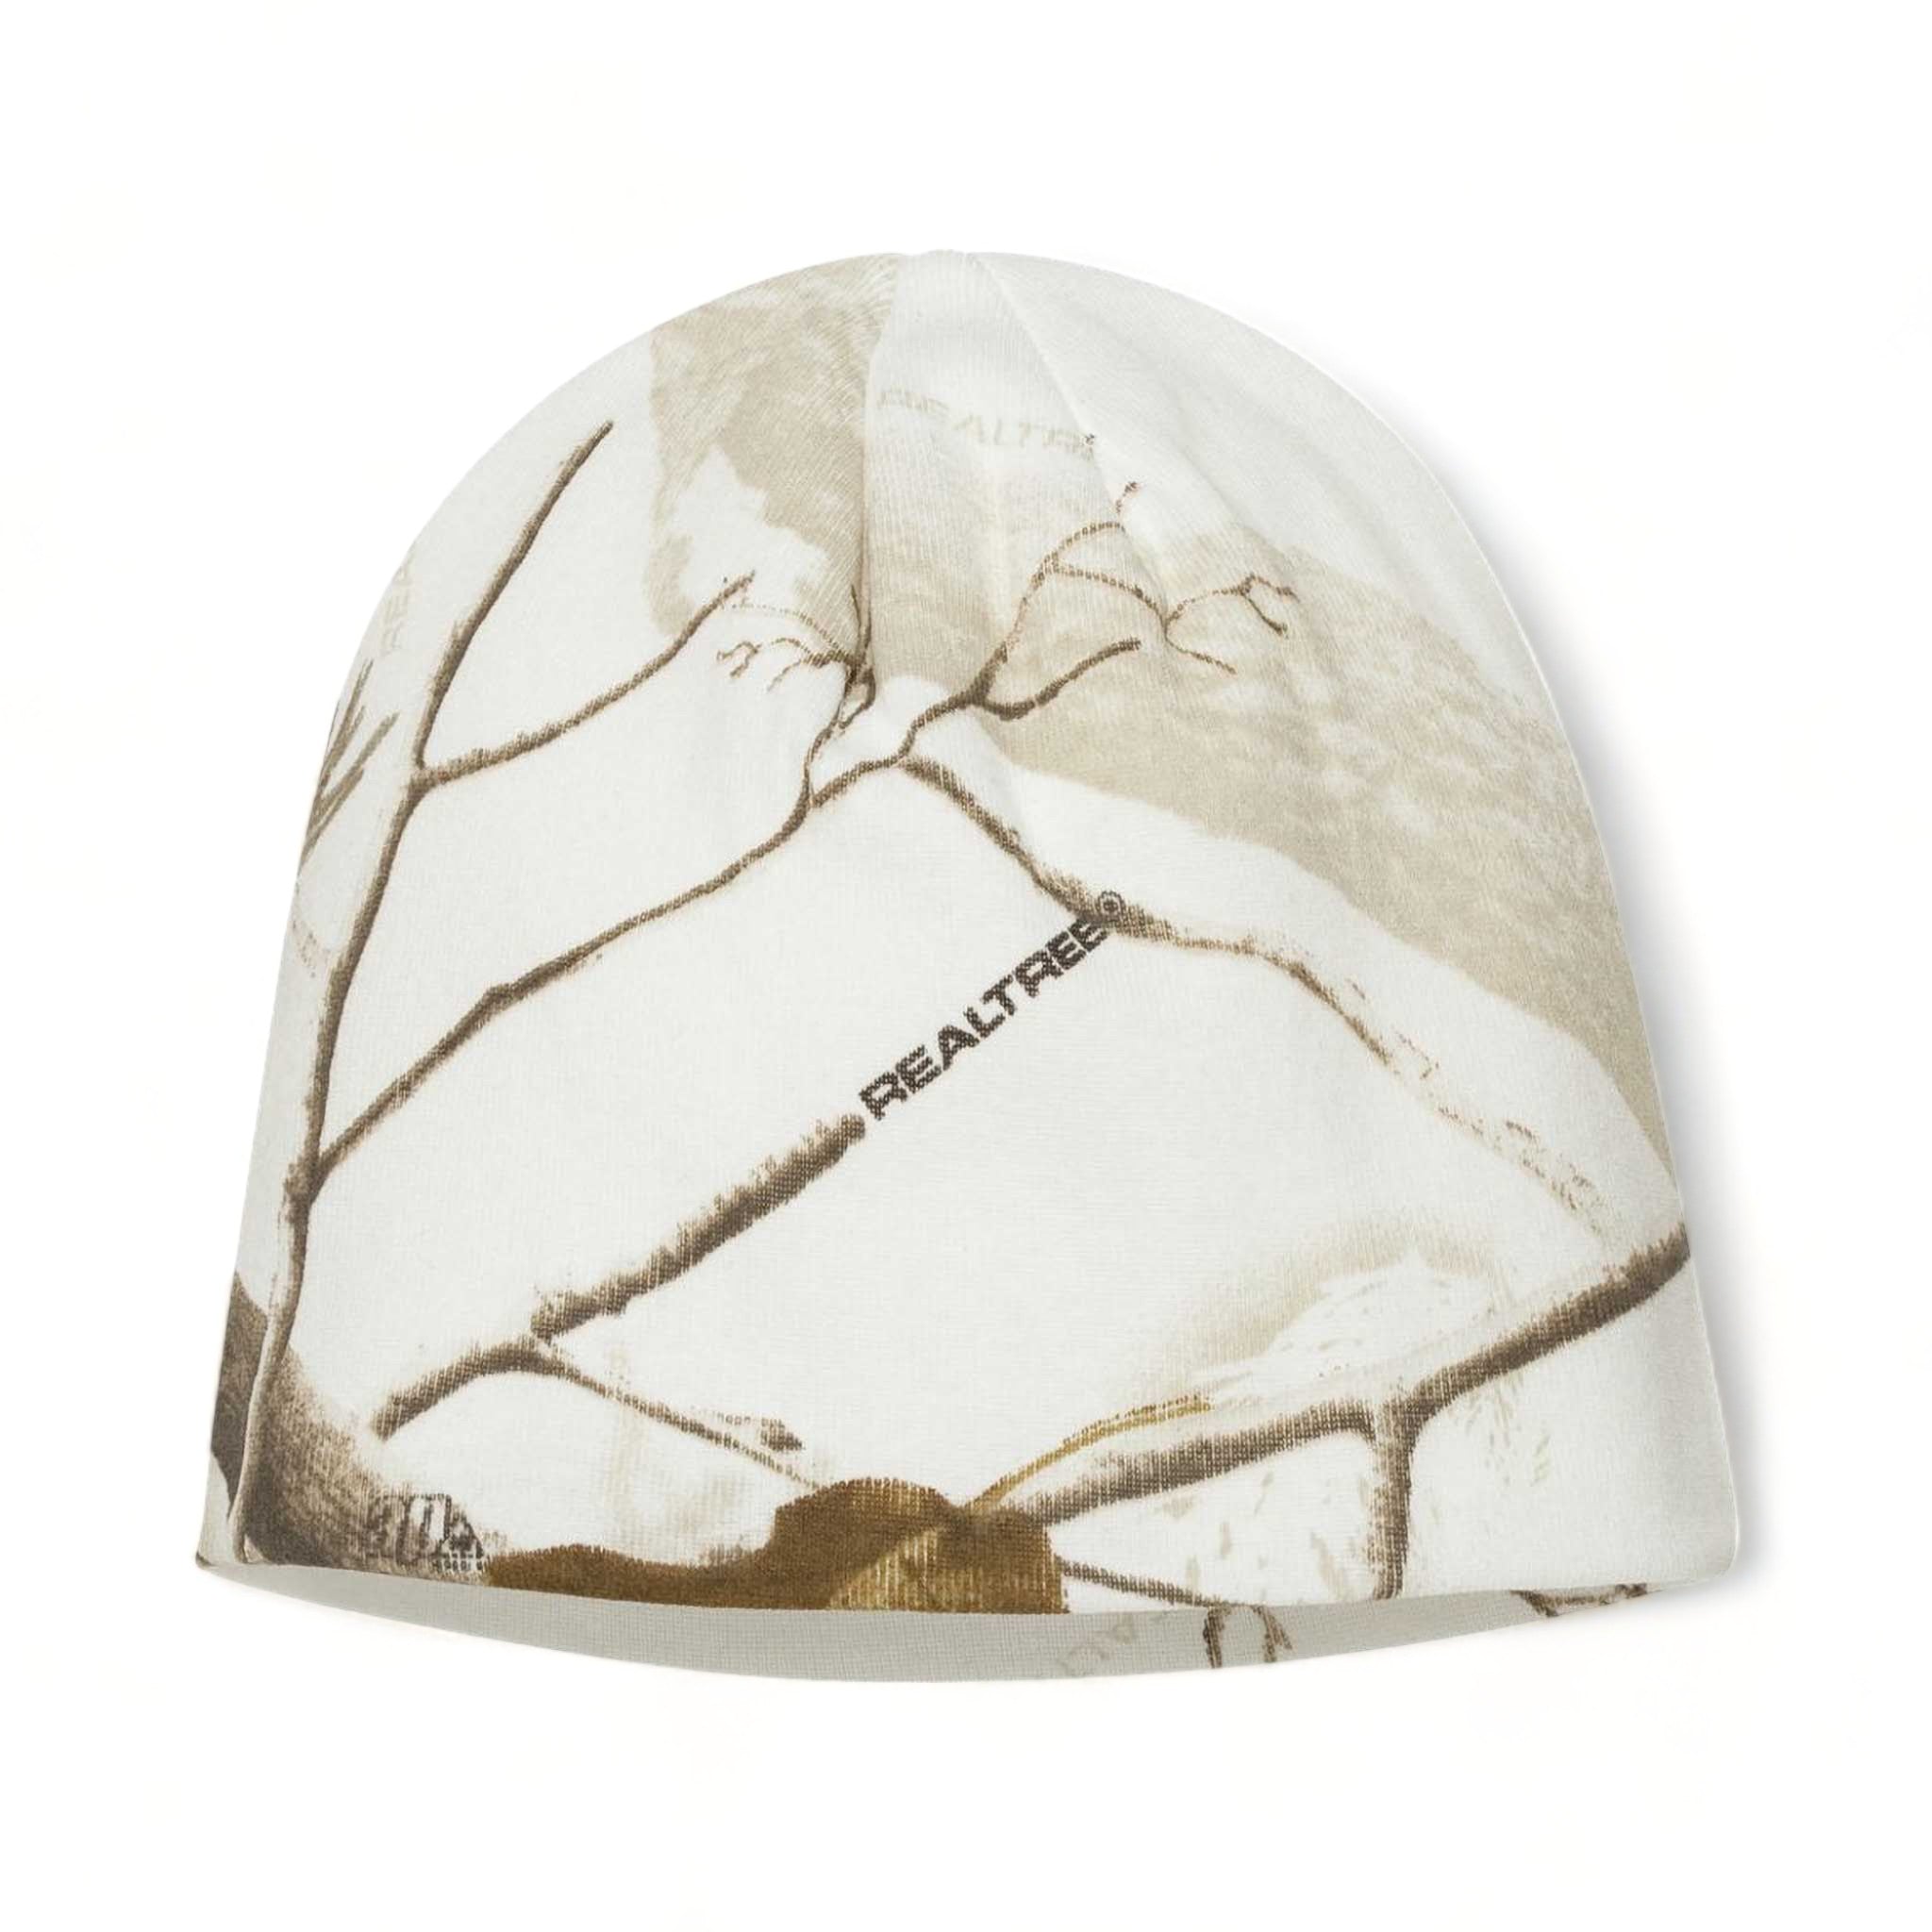 Front view of Kati LCB08 custom hat in white realtree ap